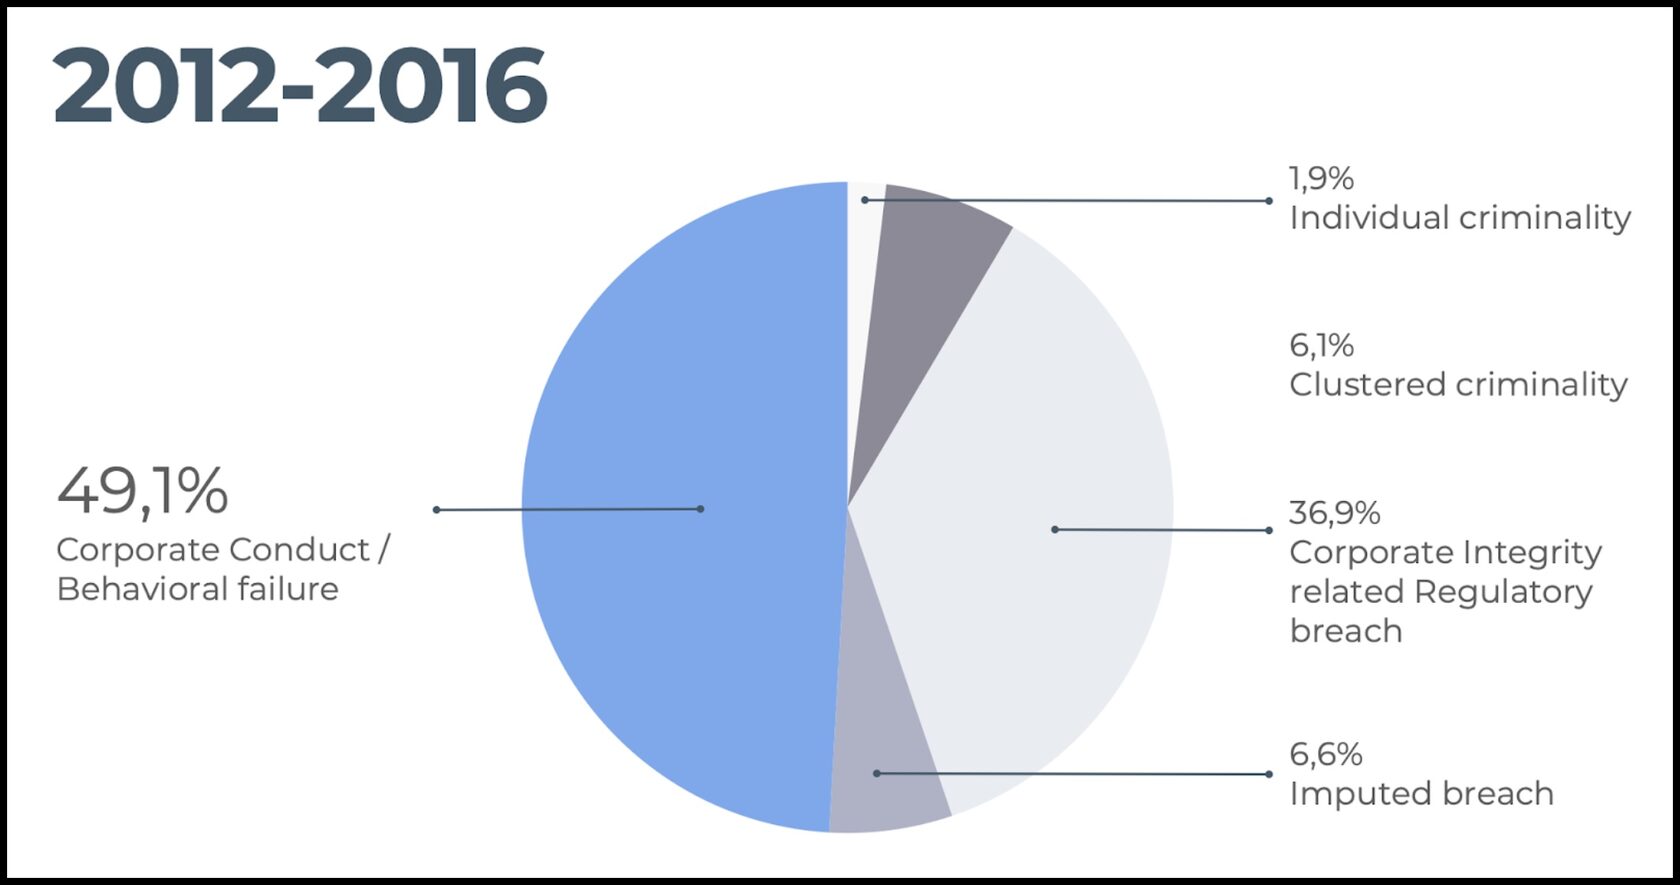 Pie chart showing a breakdown of conduct fines from 2012-2016